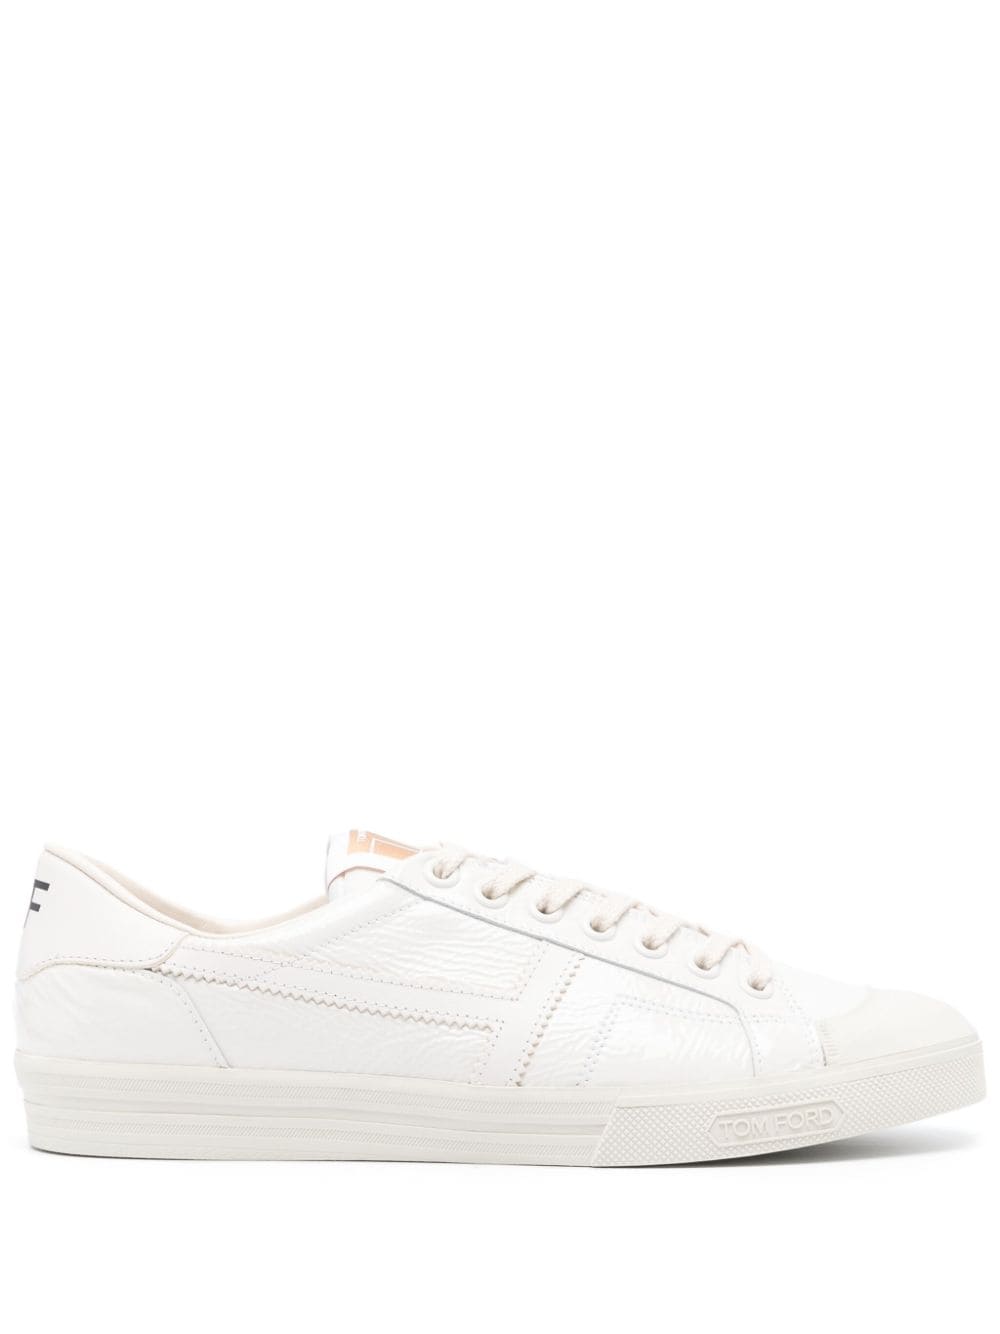 TOM FORD JARVIS LEATHER SNEAKERS